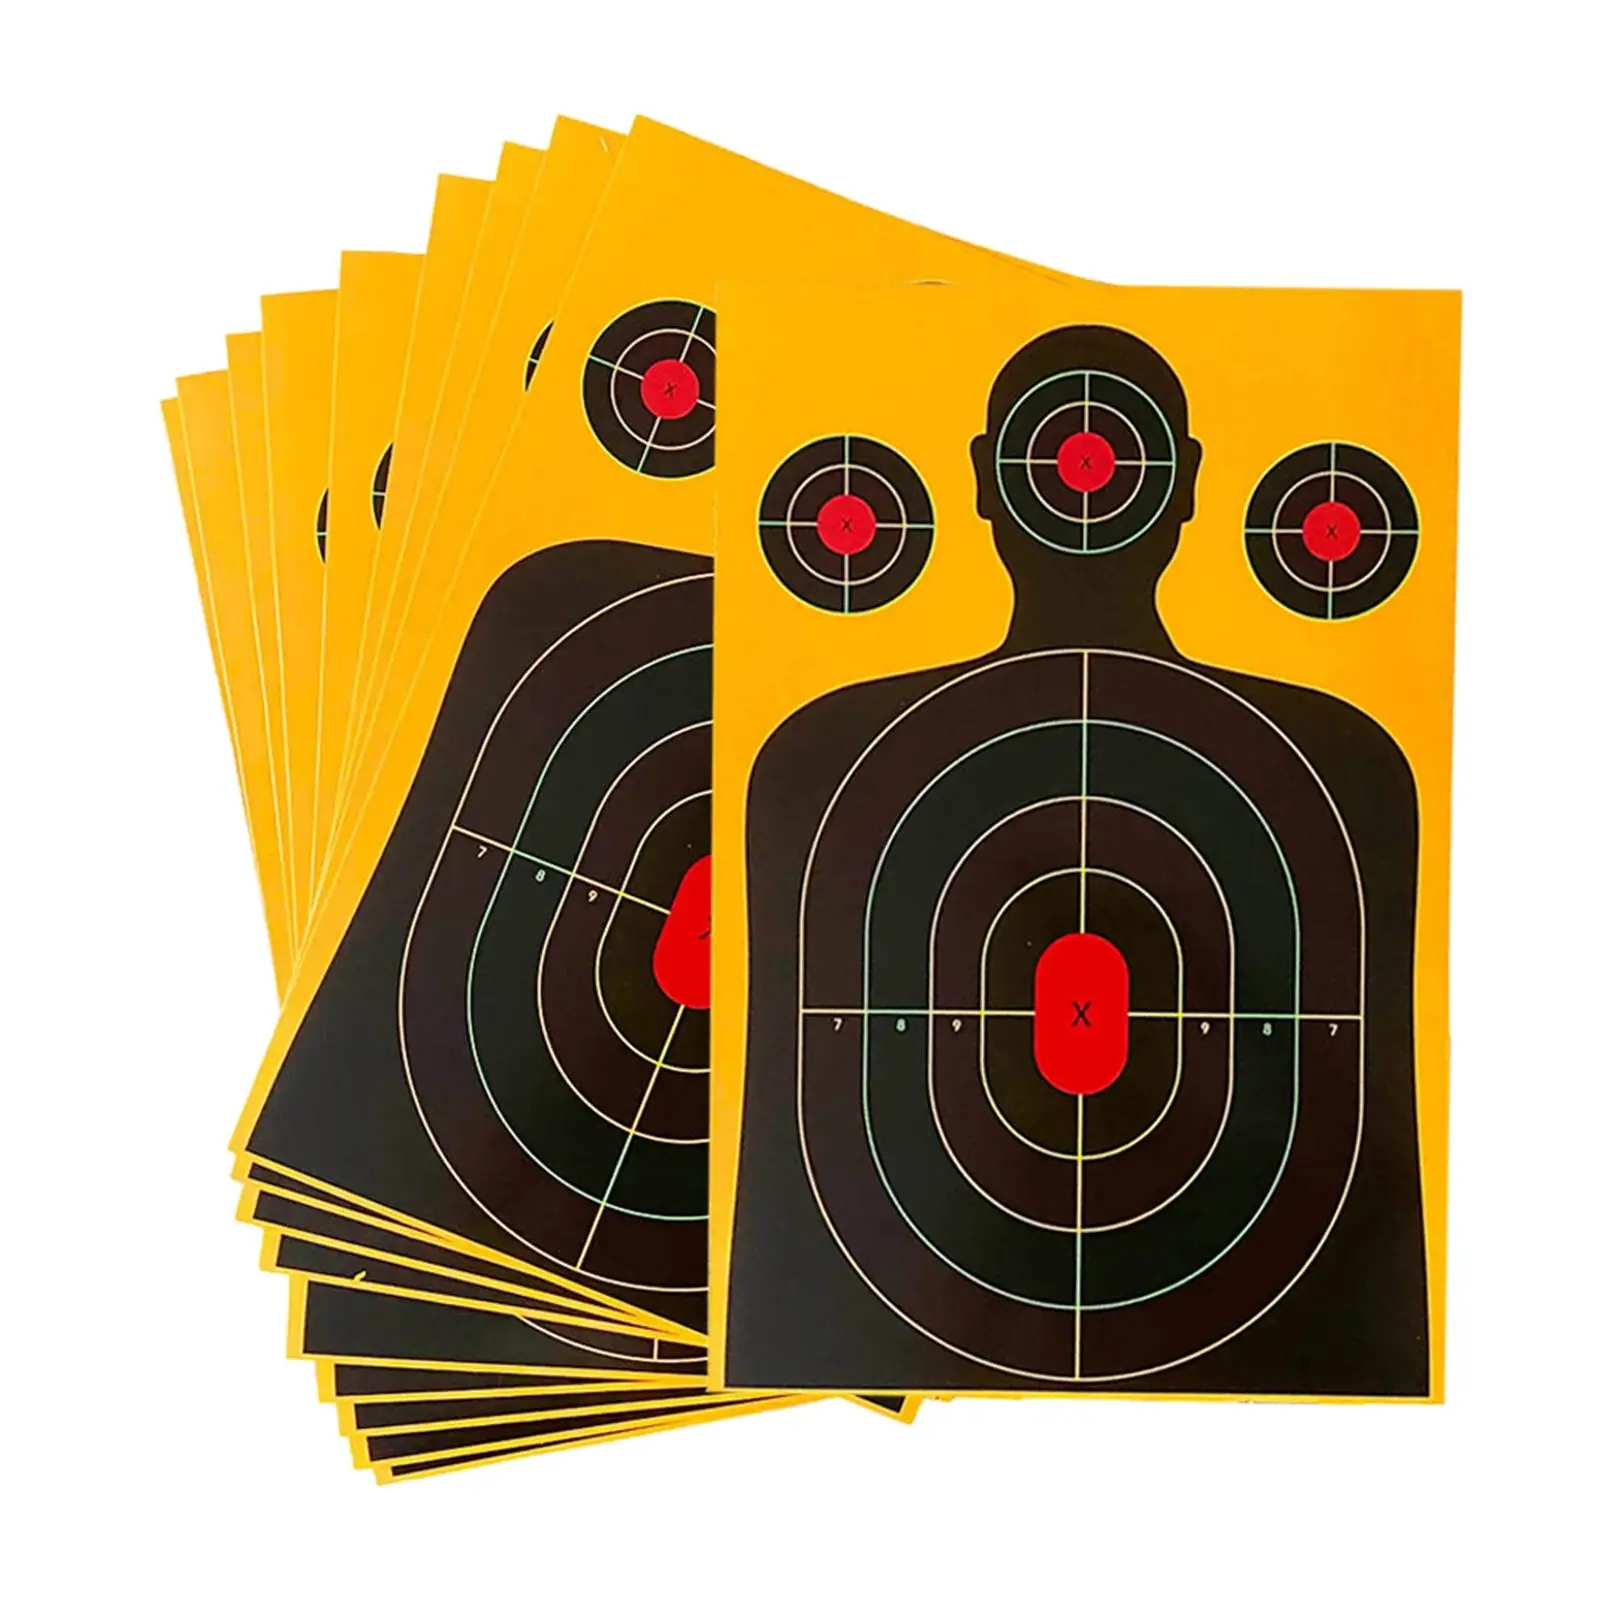 10Pcs Silhouette Target Training Target Outdoor Activities Hunting Practice Letter Partition Professional Target Target Paper